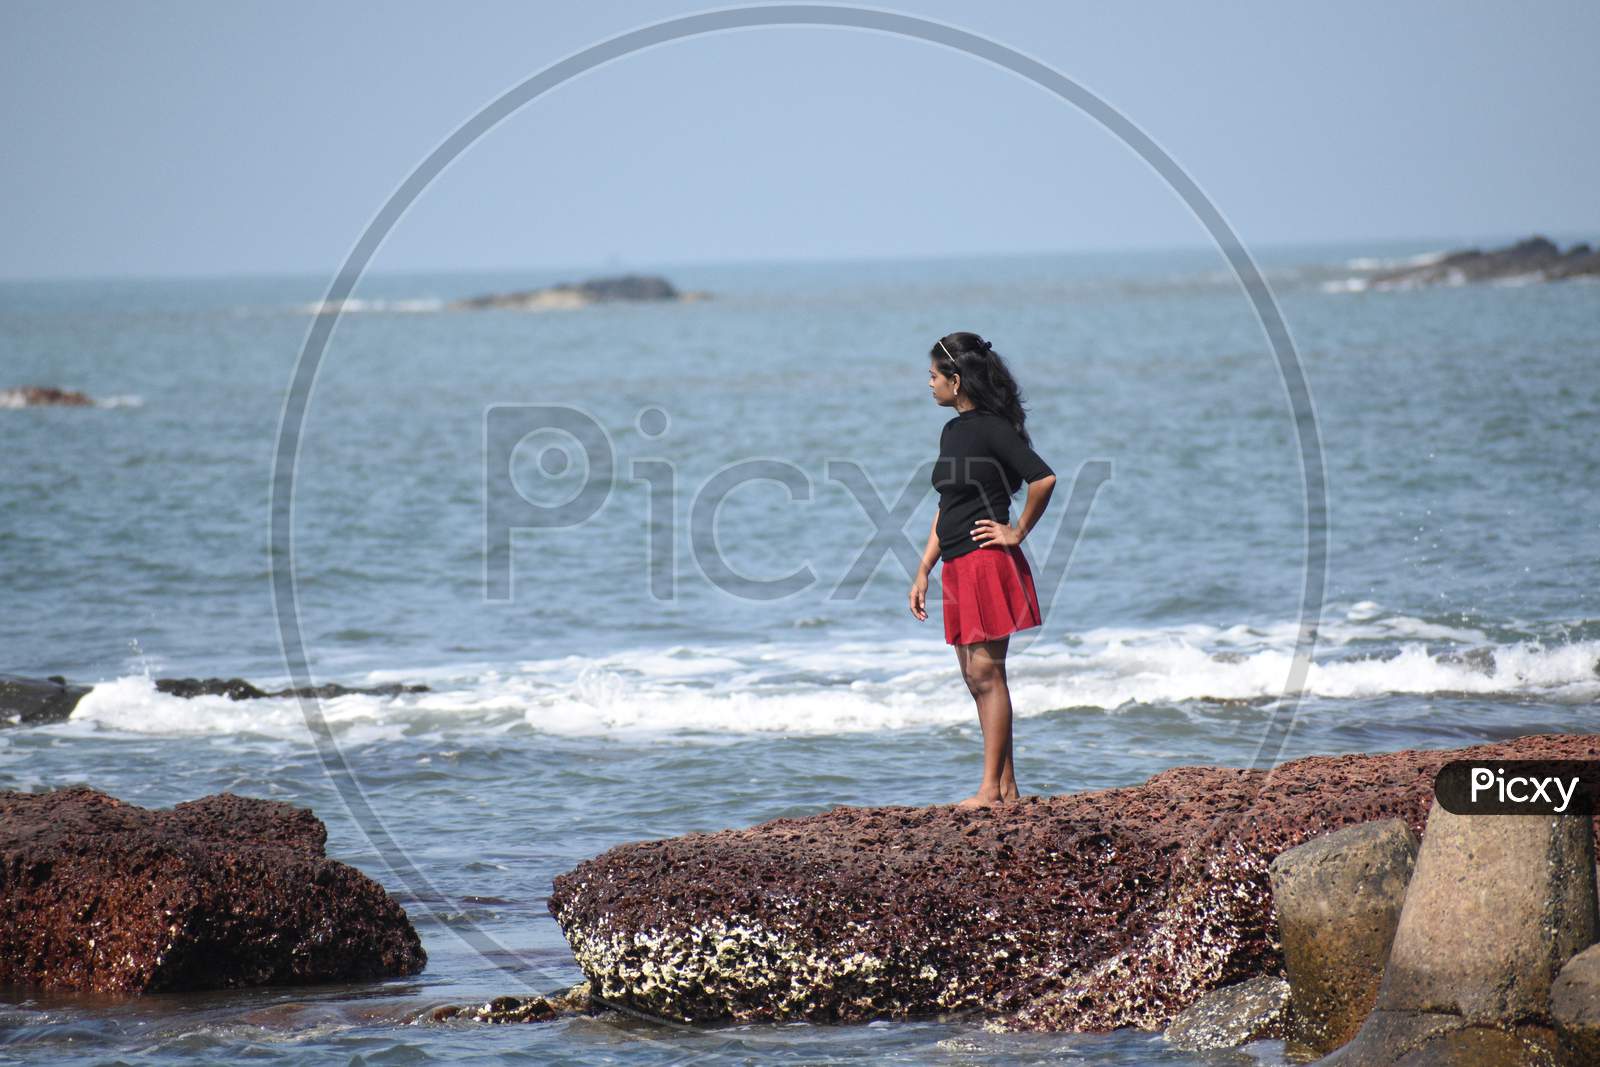 Red and black dressed women in the Goa beach.